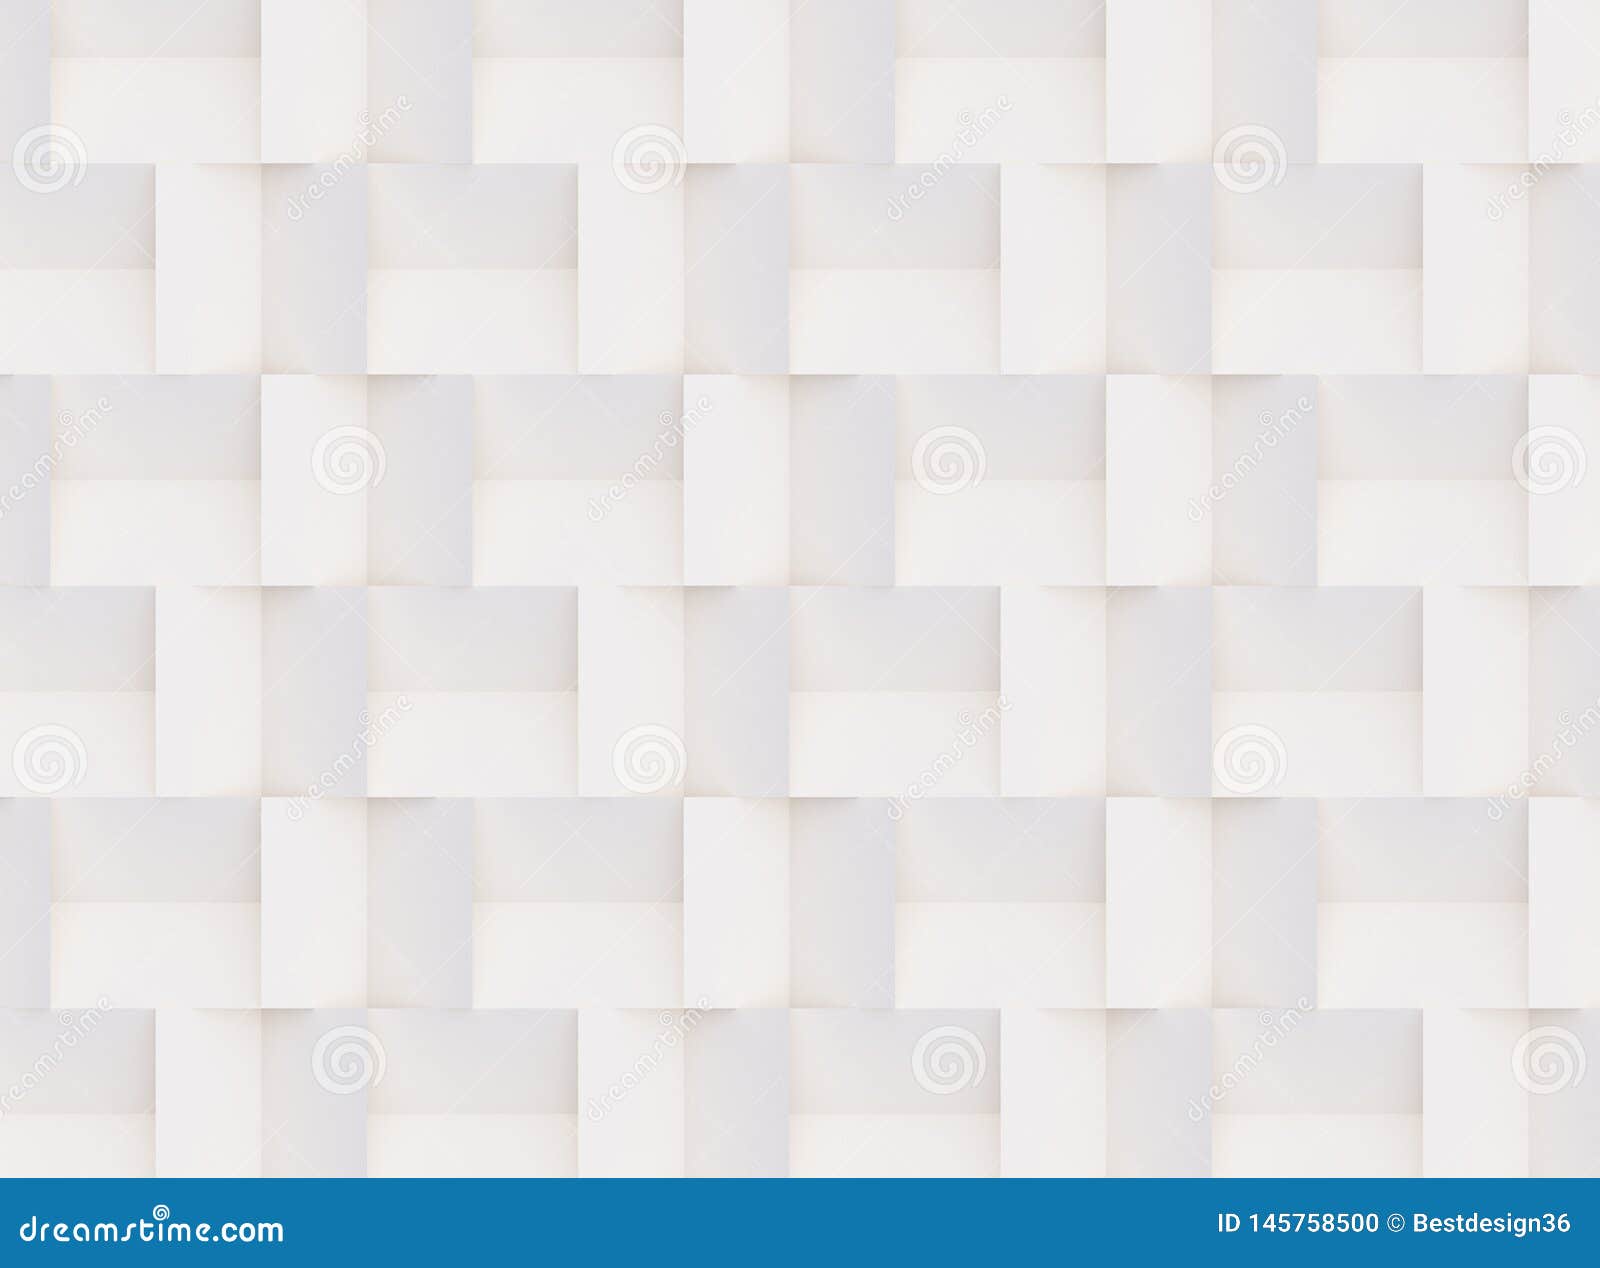 Teste padr?o 3D feito das formas geom?tricas brancas e bege. Seamless 3D pattern made of white and beige geometric shapes, creative background or wallpaper surface made of light and shadow. Futuristic decorative abstract texture design, simple graphic elements